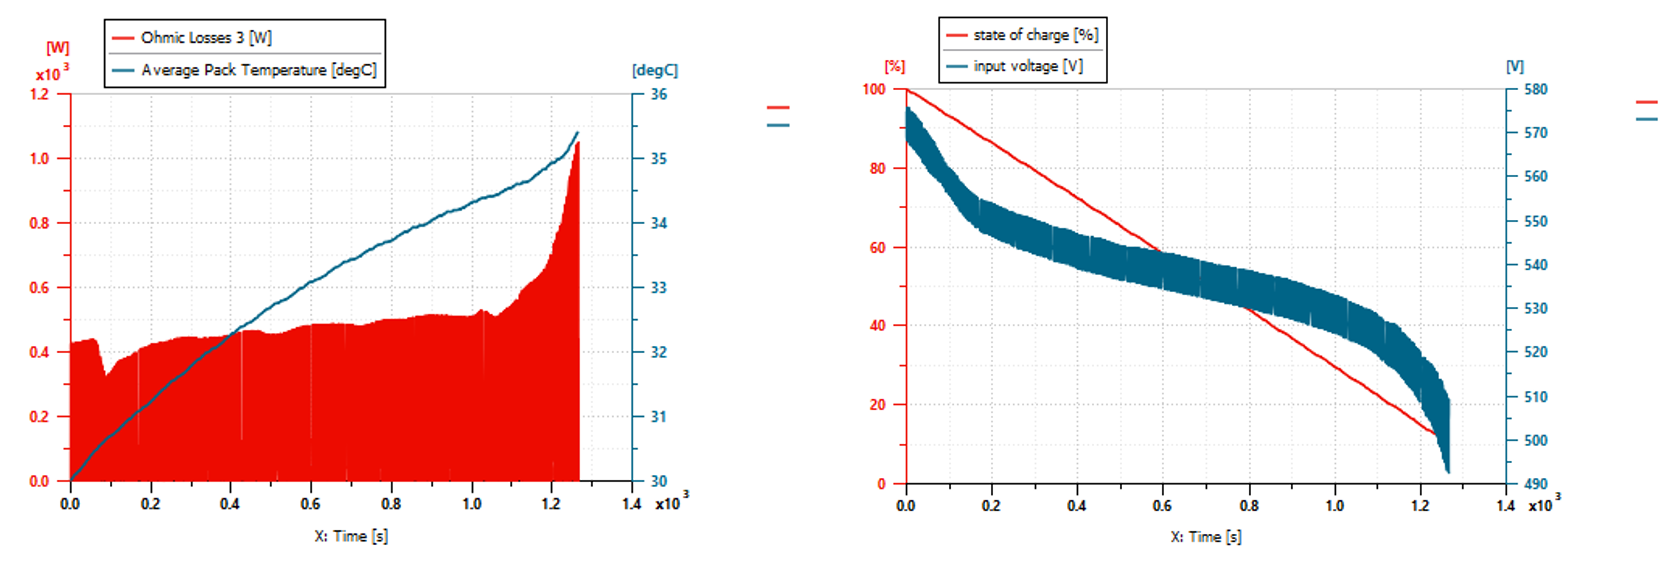 Electric race car Thermal management plot (left) and State of charge plot (right)